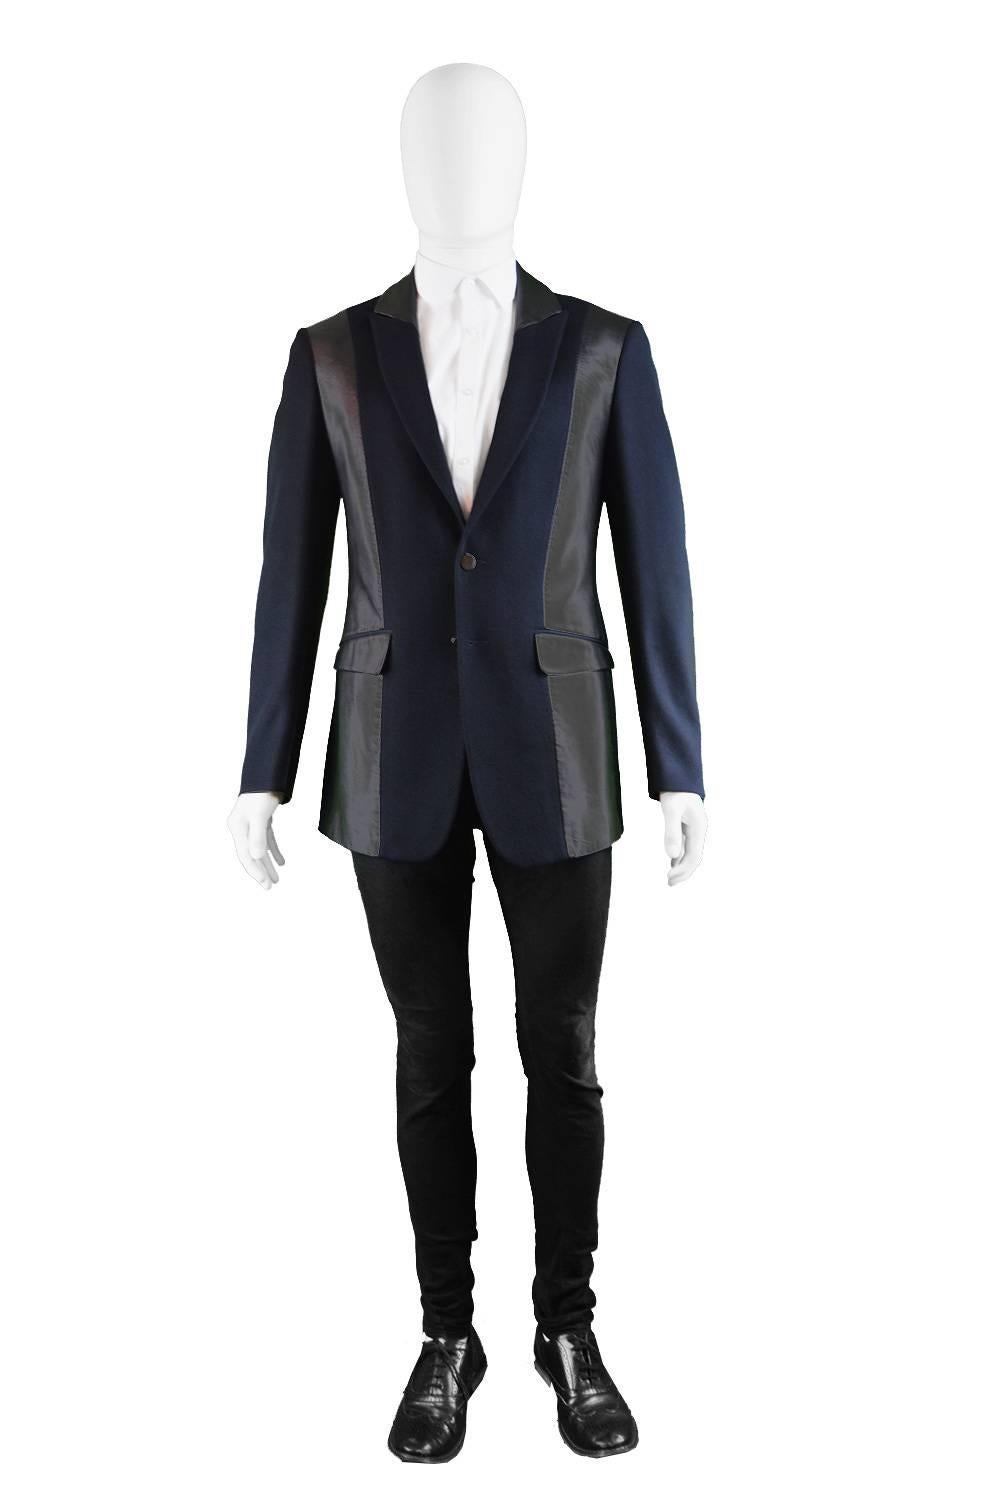 An excellent vintage mens Thierry Mugler jacket from circa the 1990s in a navy blue pure wool with black leather (possibly high quality faux leather) panels on the body, sleeves & collar which looks so current. The lapels have Muglers signature